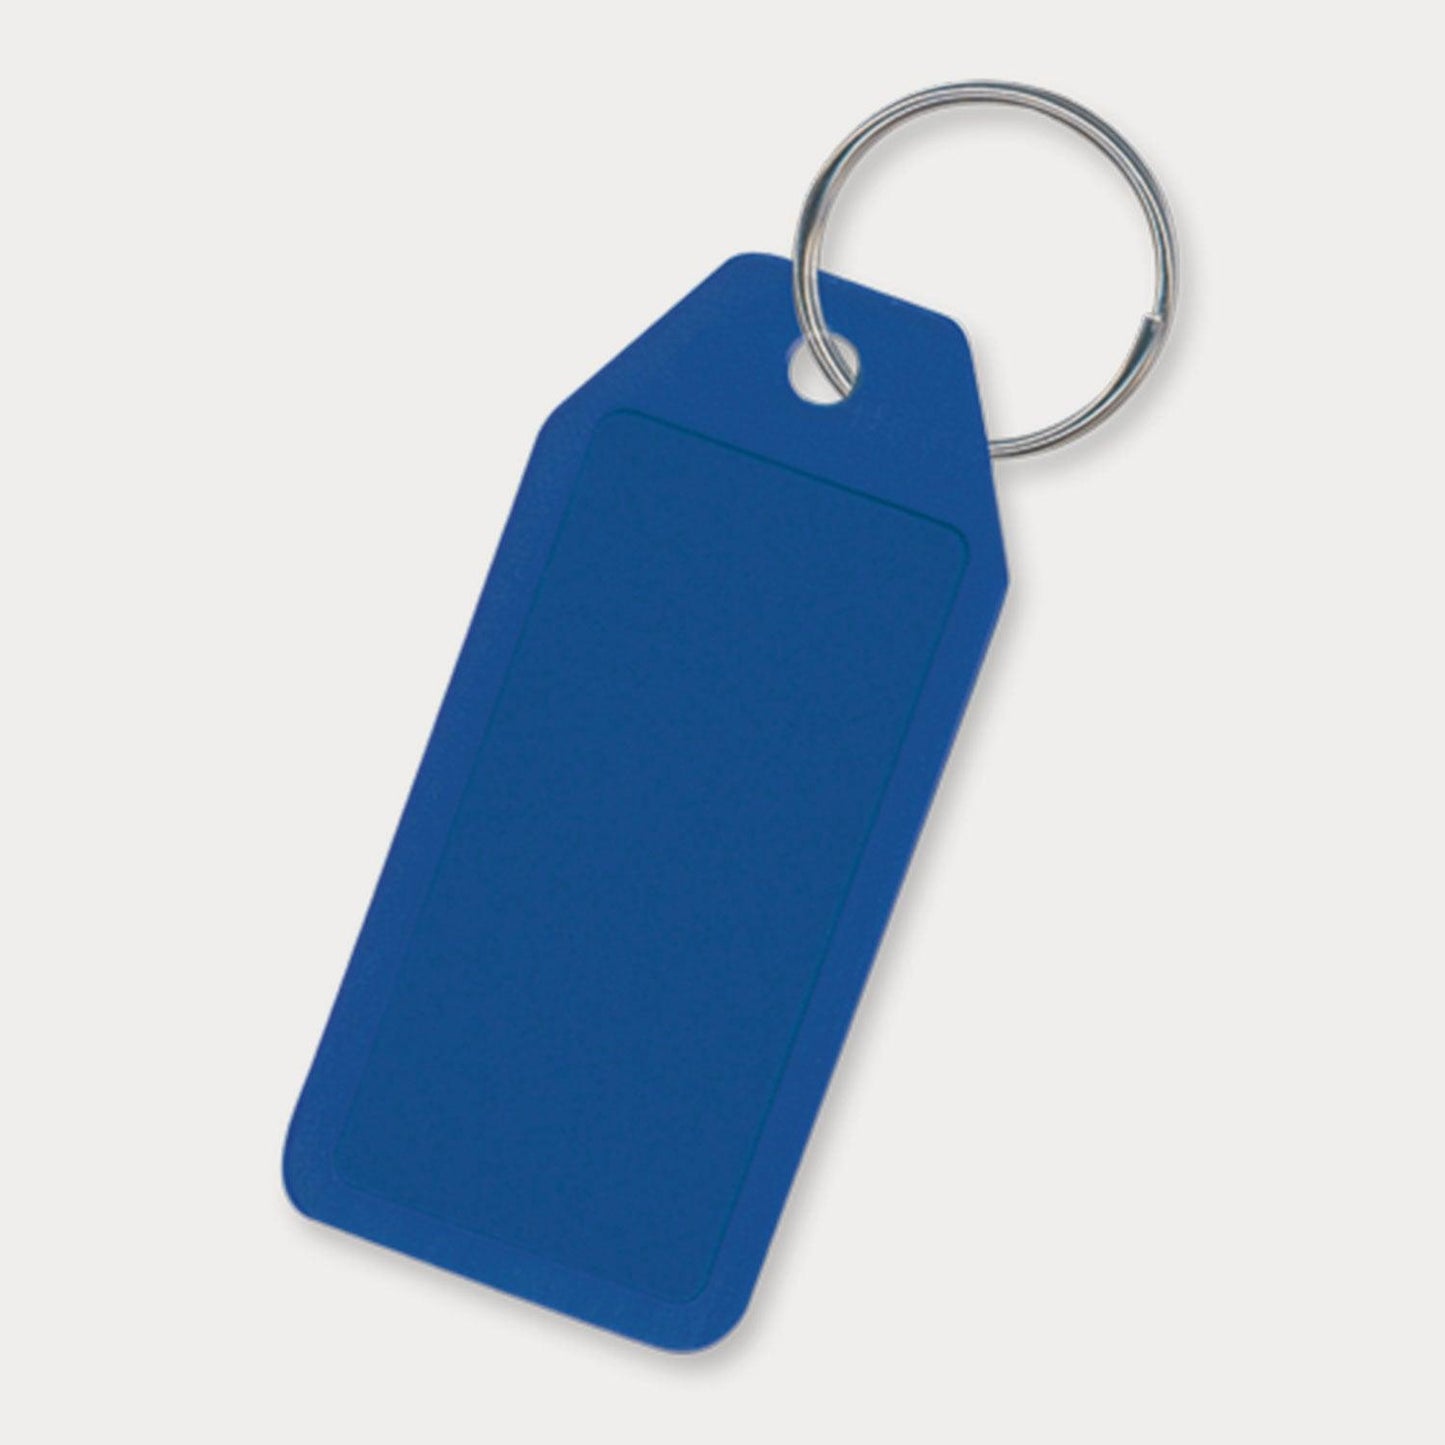 Budget Key Ring (HNA) - Persopens Promotional Products LTD